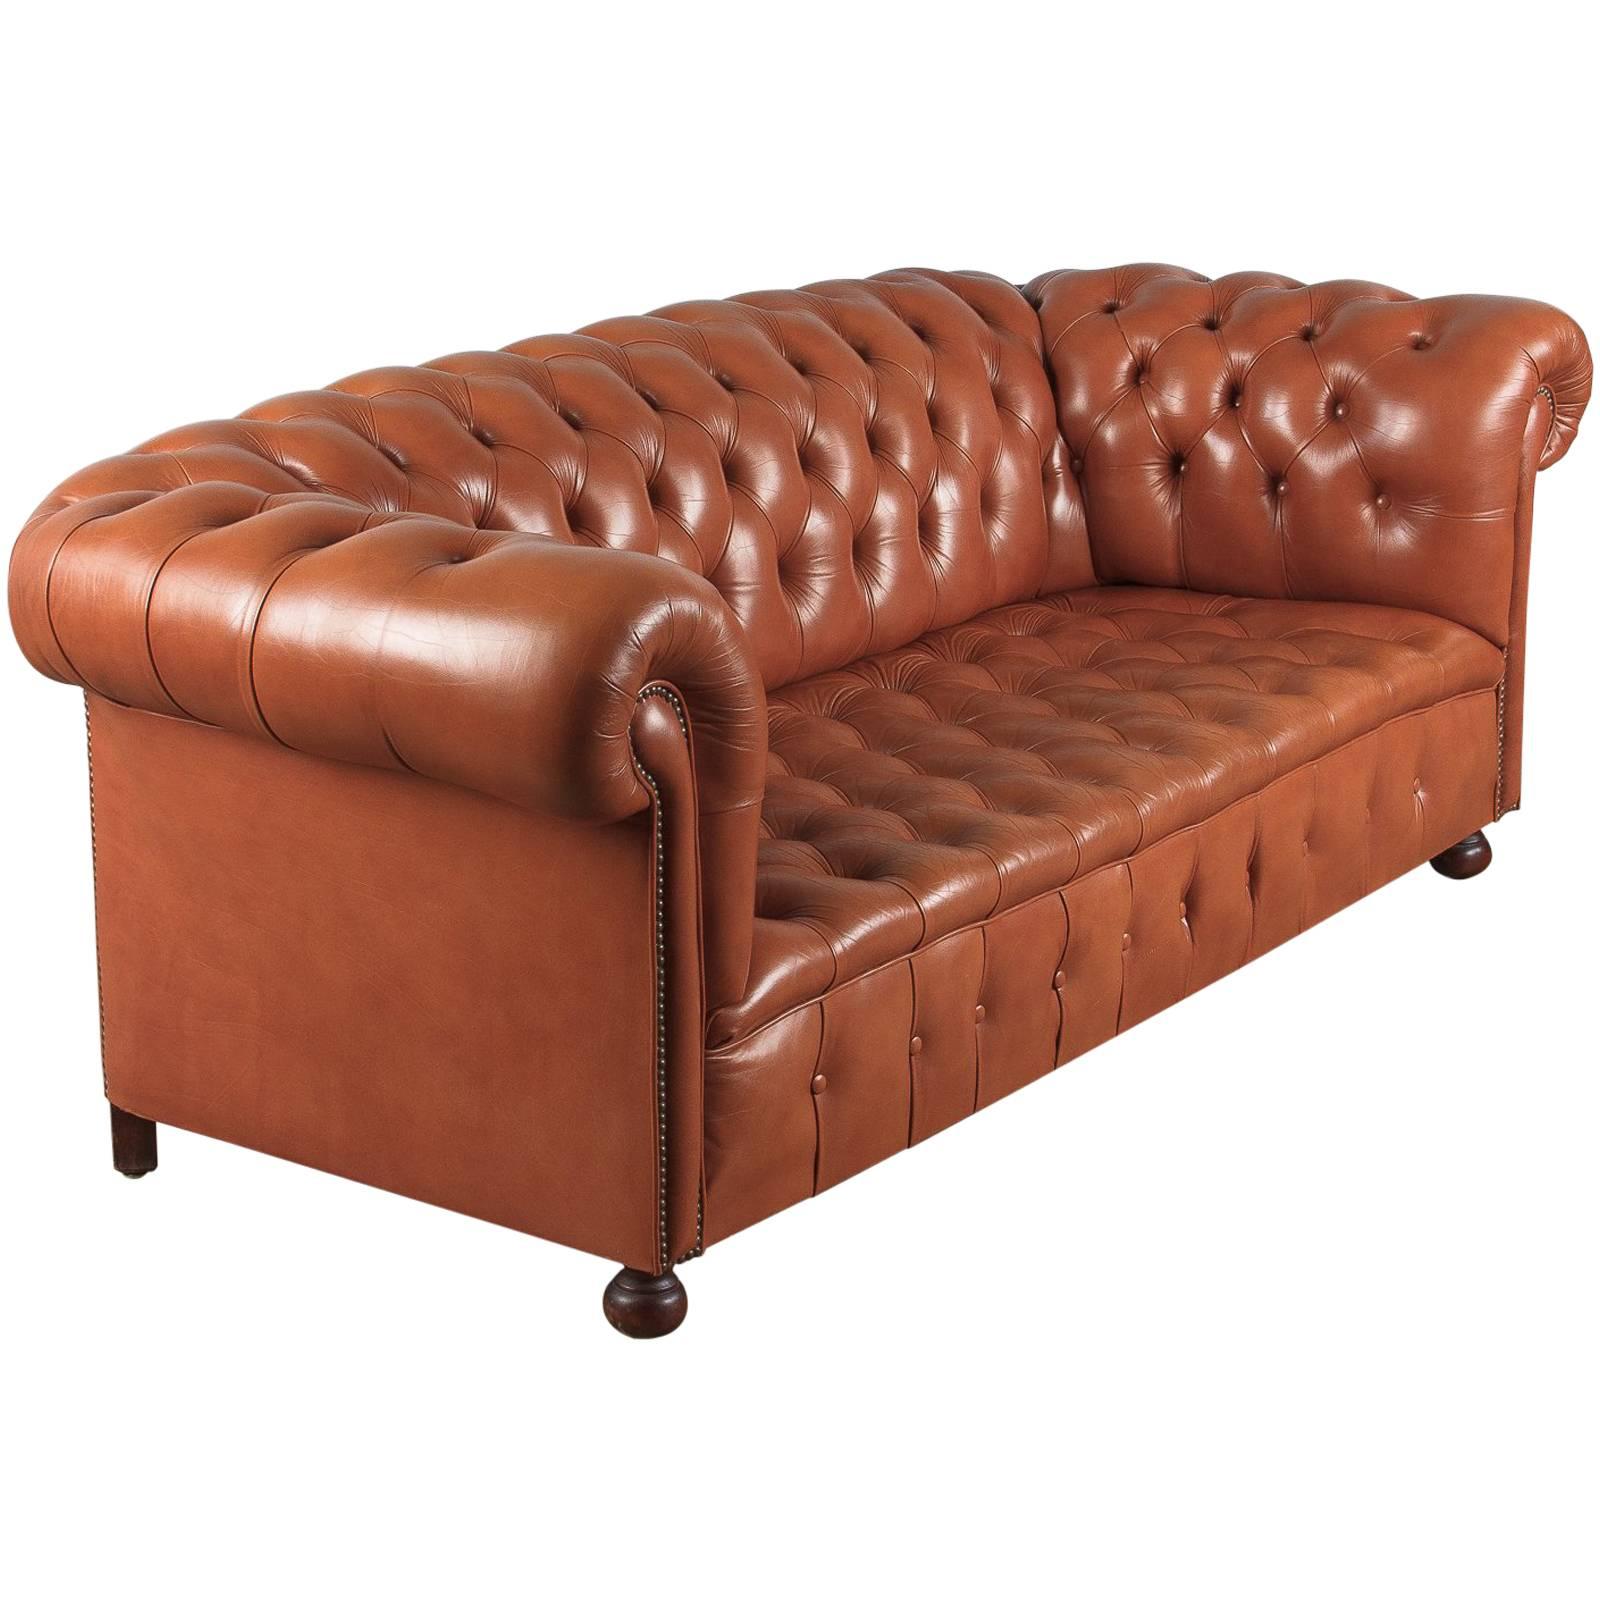 Vintage English Leather Chesterfield Sofa, 1960s